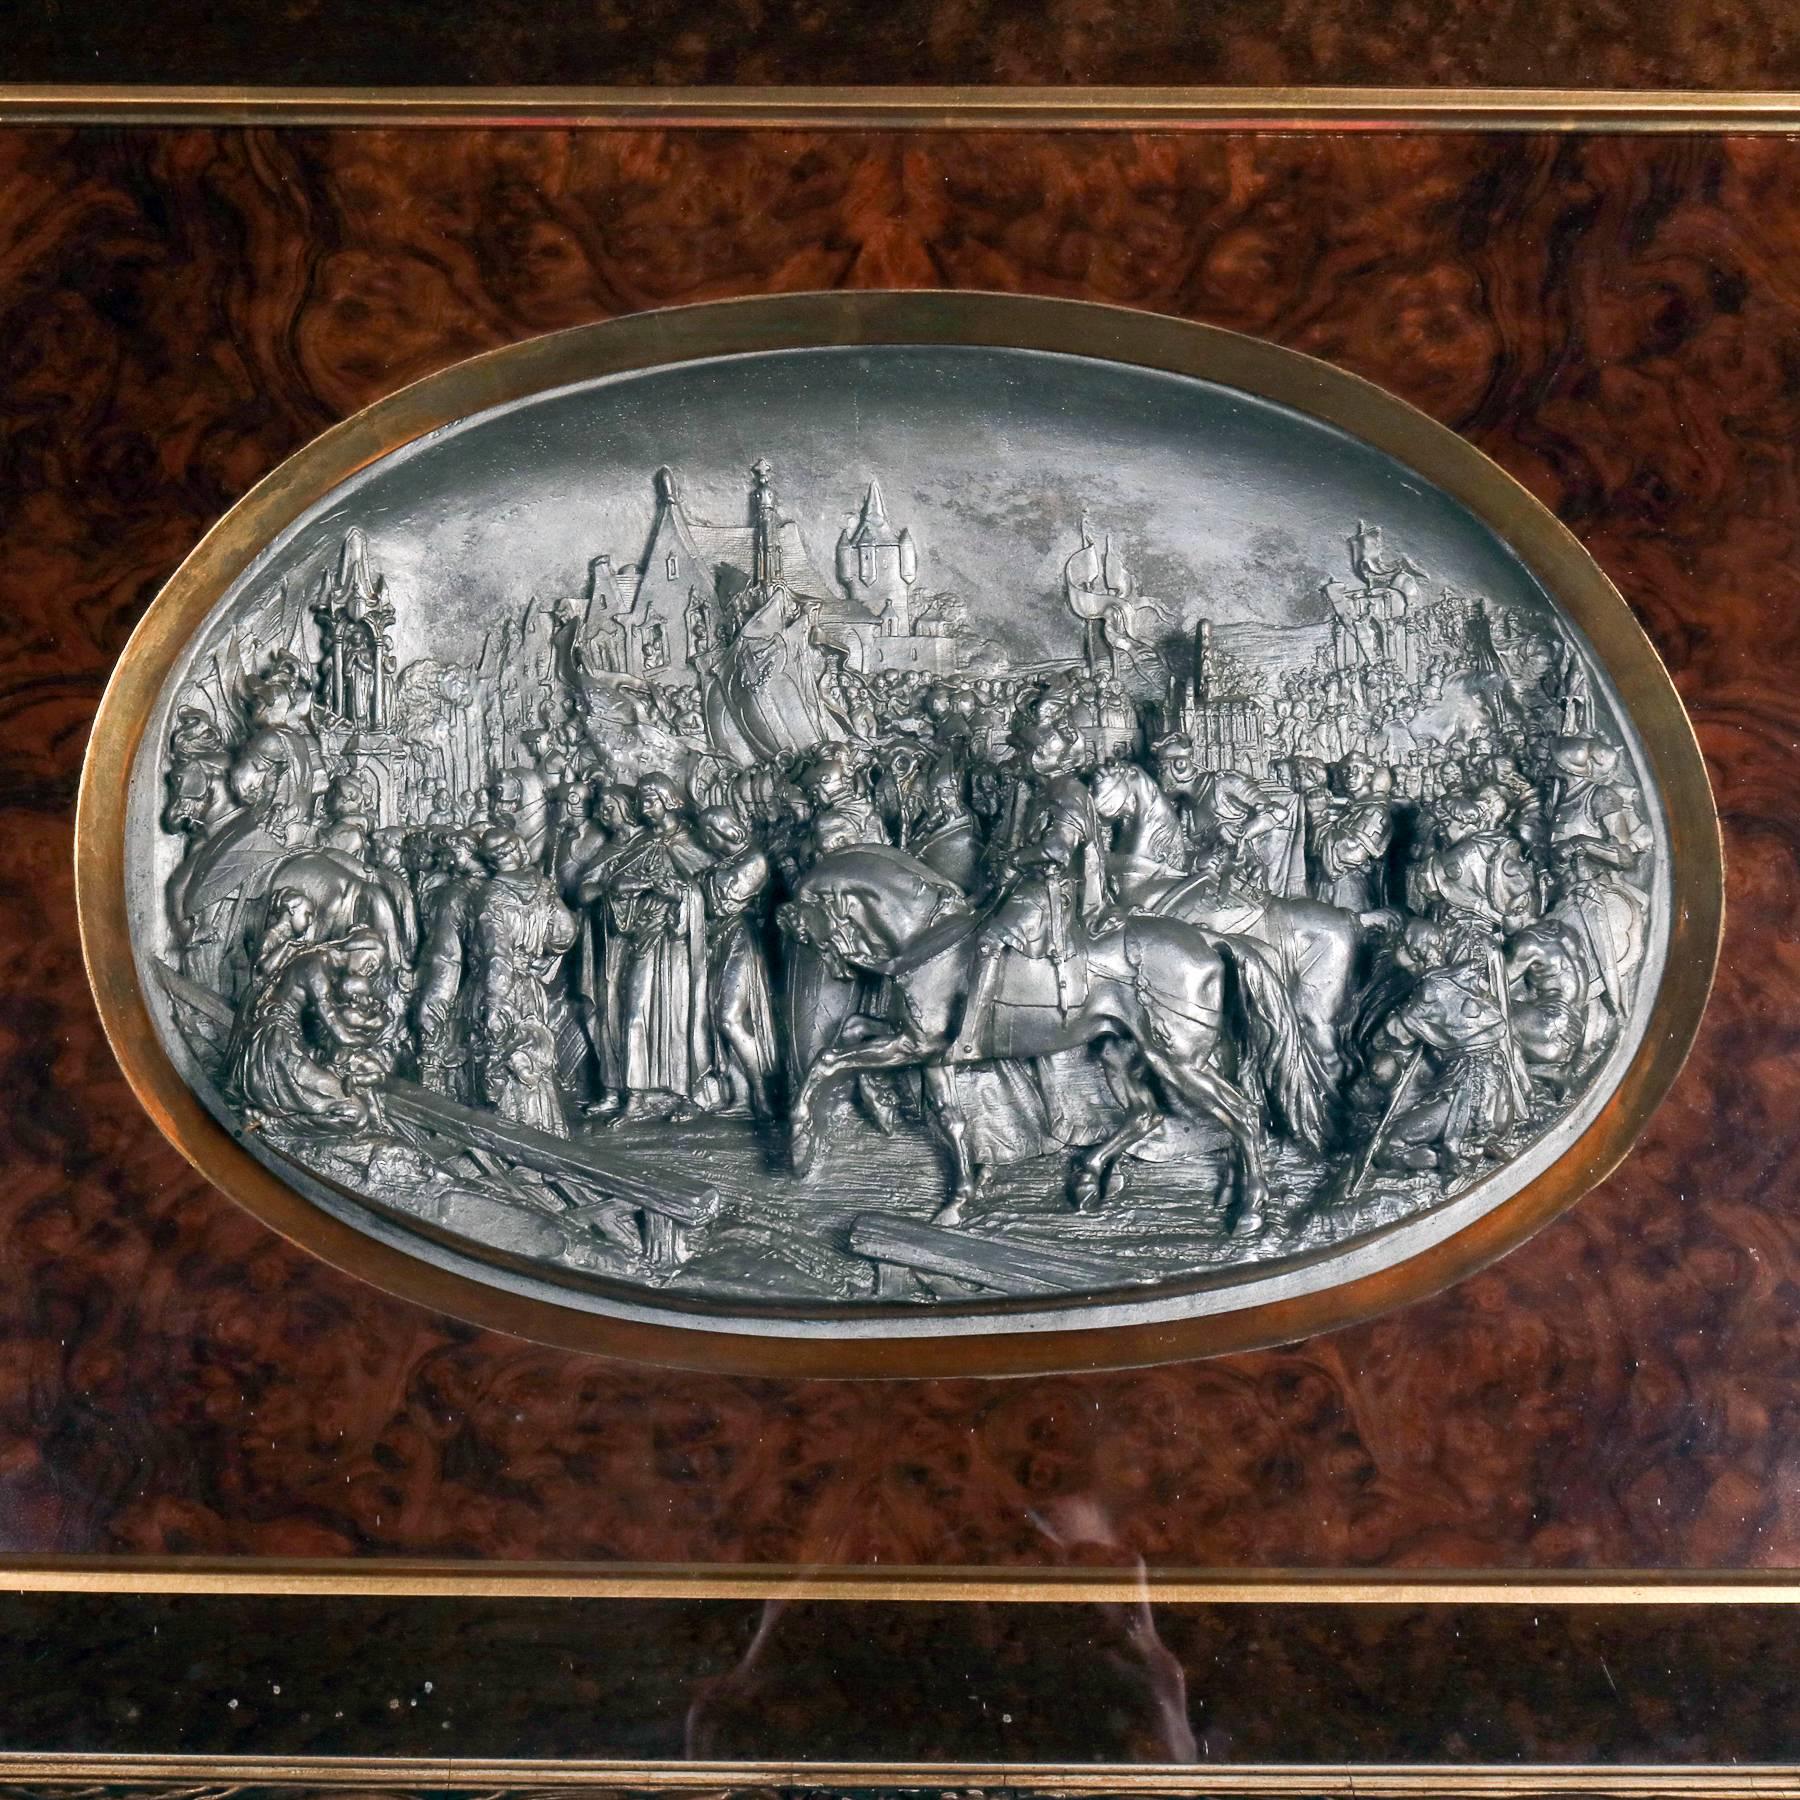 Antique Gothic cast high relief scene depicts peasant villagers and warriors on horseback with cityscape background, set in gilt and burl shadow box frame, 19th century

Measures: 22.5